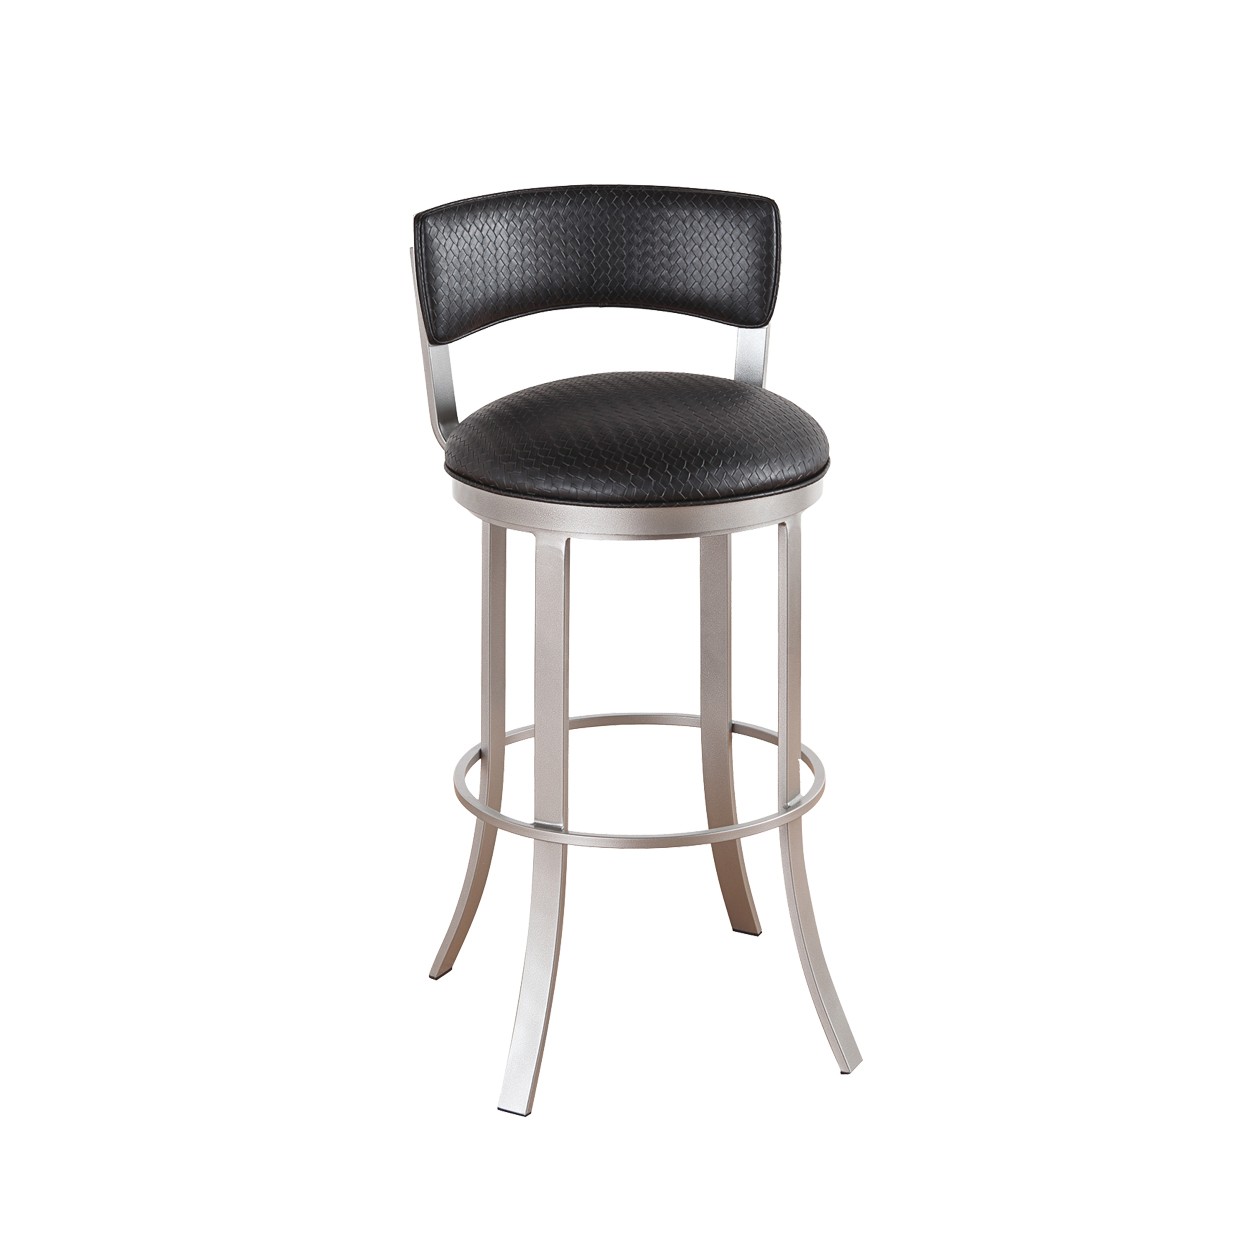 Callee Bailey Upholstered Back Bar, Padded Bar Stools With Arms